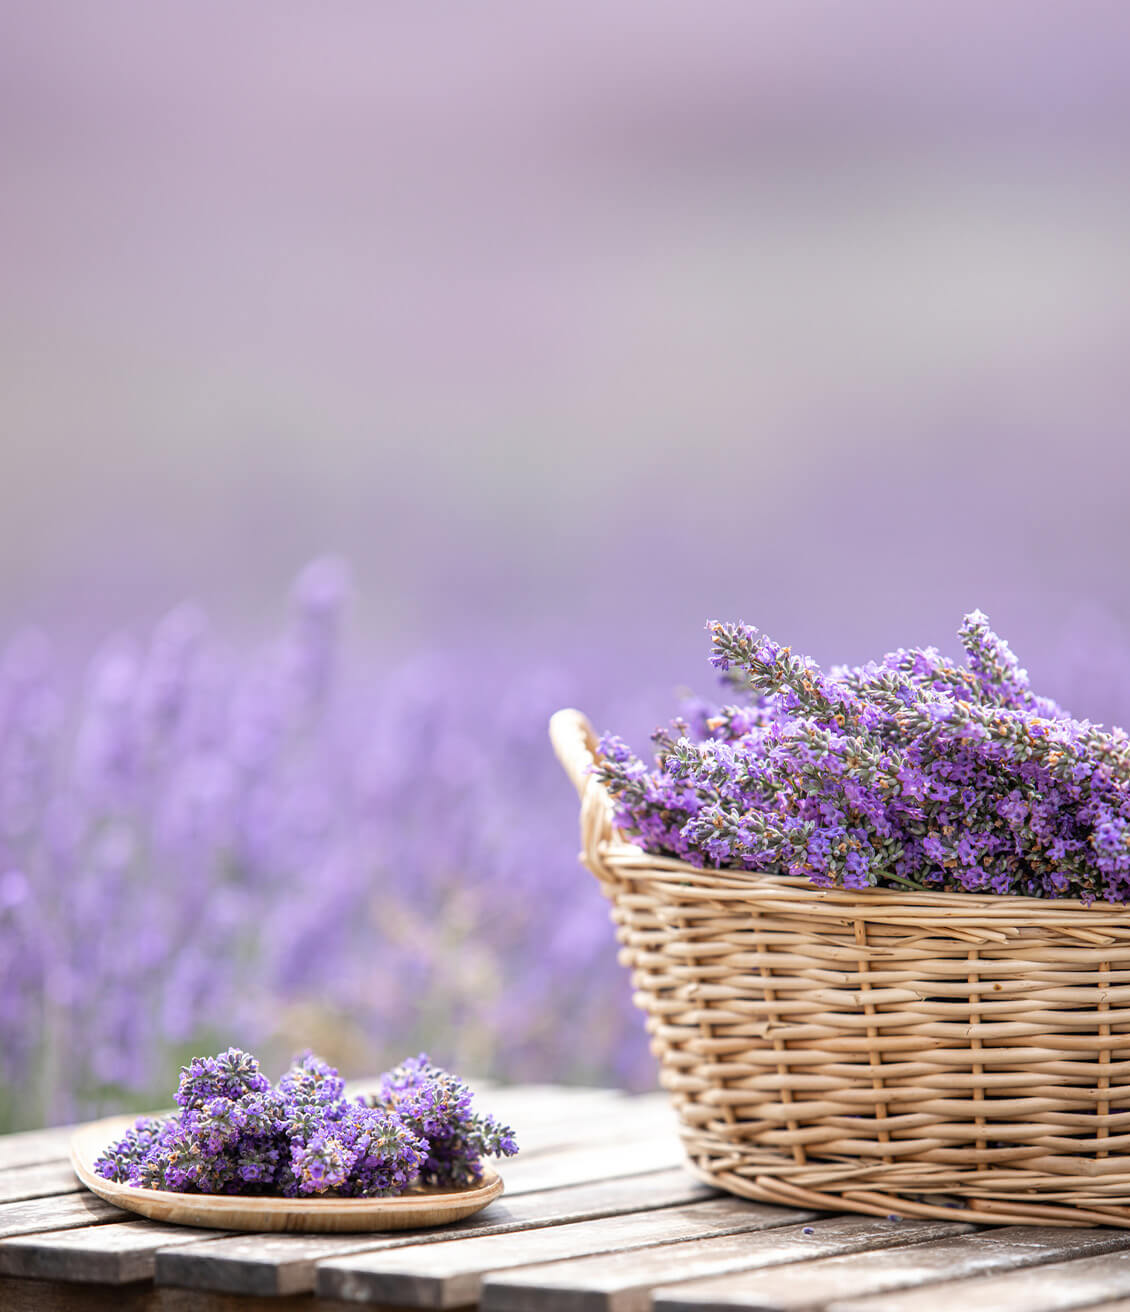 Lavender fields are typical in the south of france